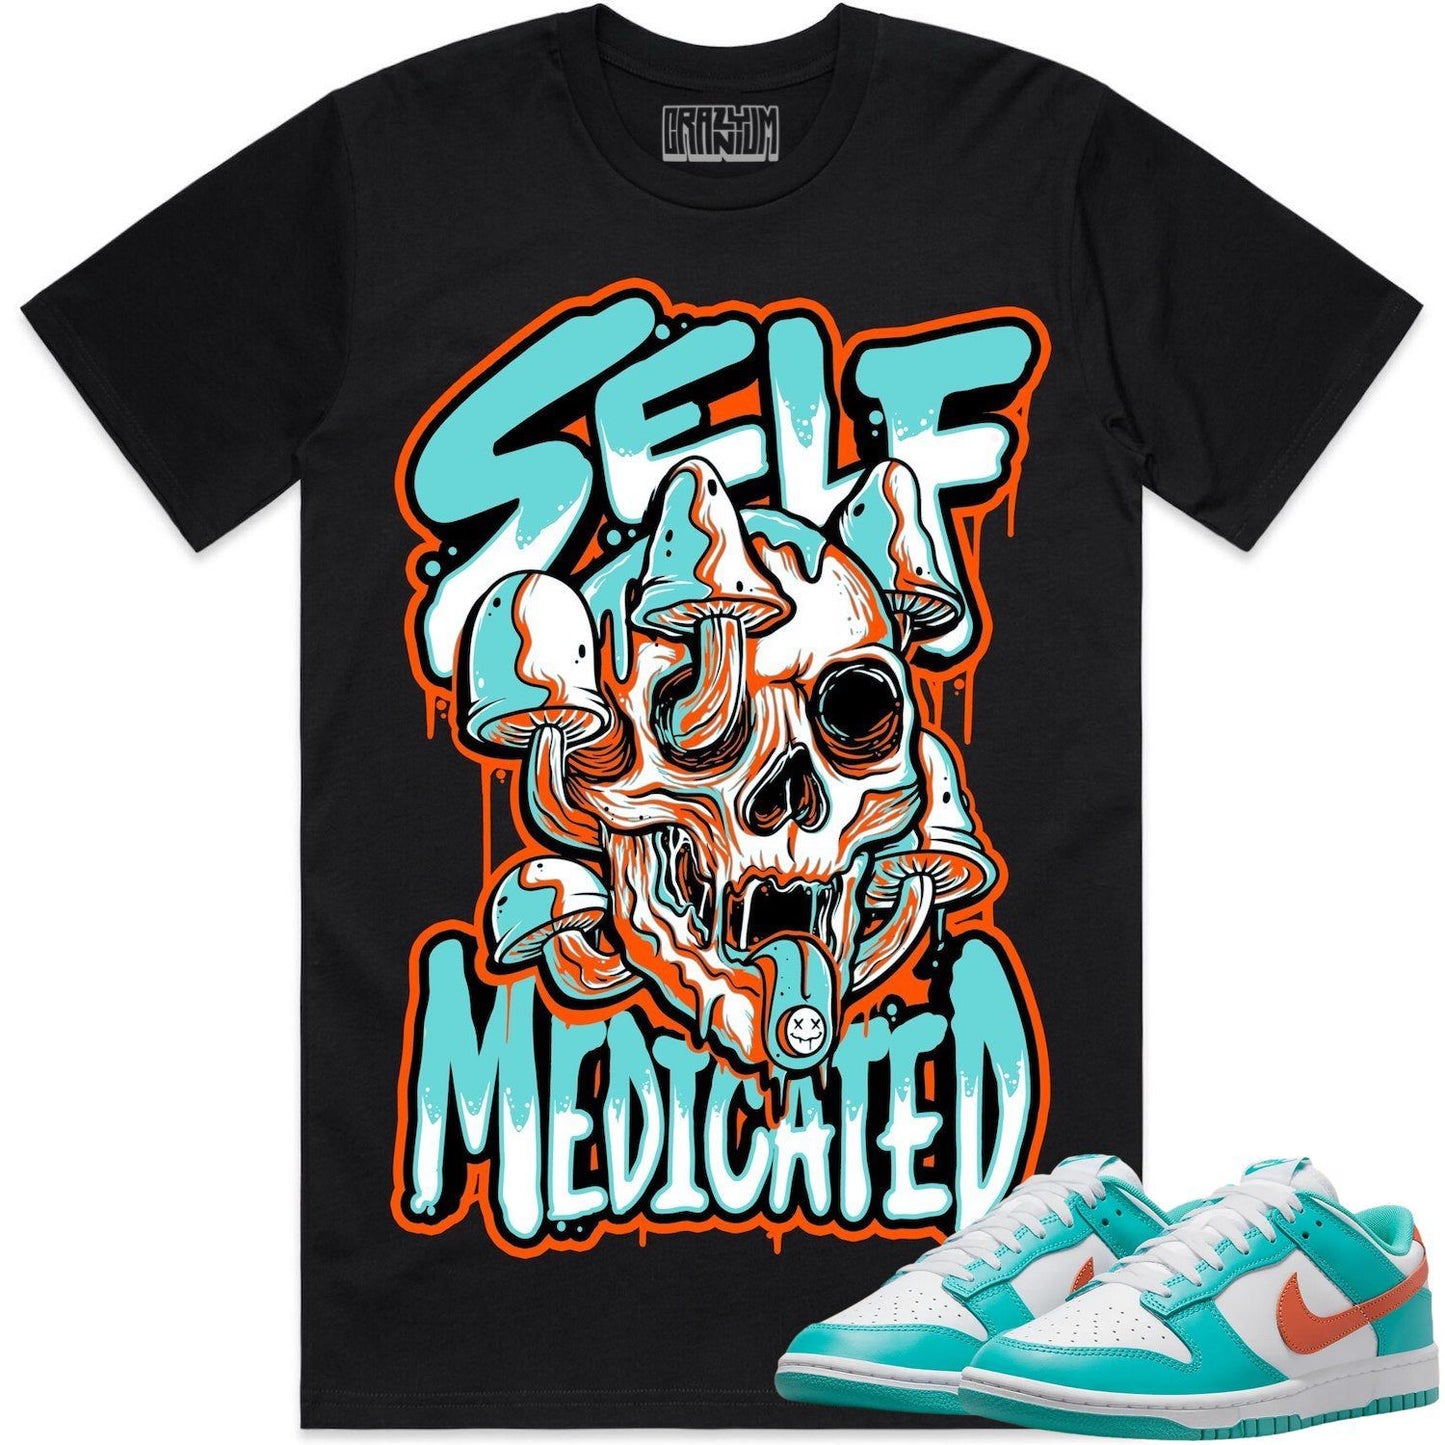 Miami Dolphin Dunks Shirts- Dunks Sneaker Tees - Self Medicated